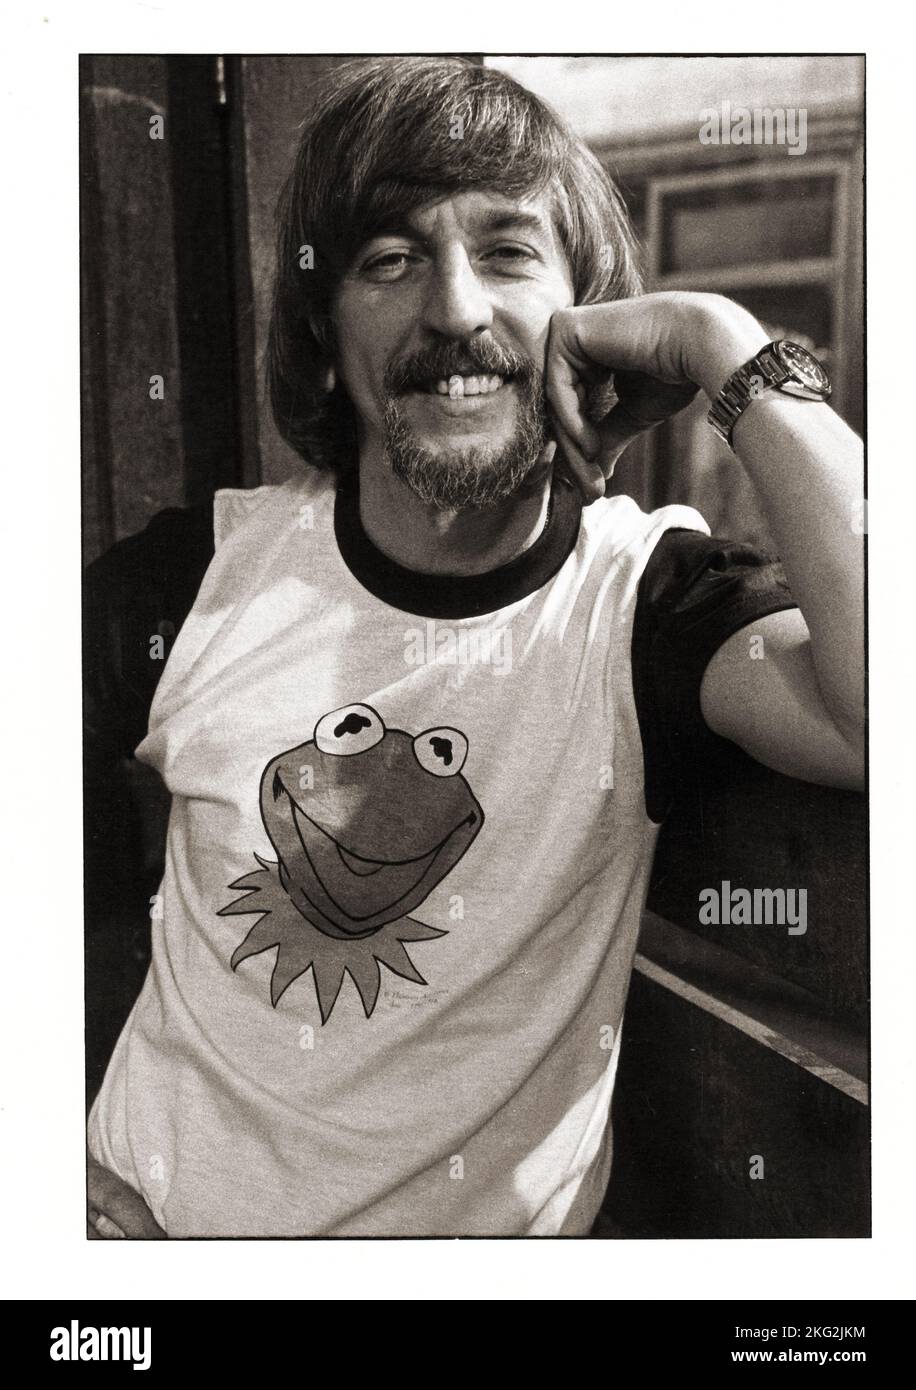 A casual portrait of he late actor puppeteer Carrol Spinney at home & in his Kermit the Frog t shirt. On Sesame Street, Spinney played inside of Big Bird and operated the Oscar the Grouch muppet. Stock Photo